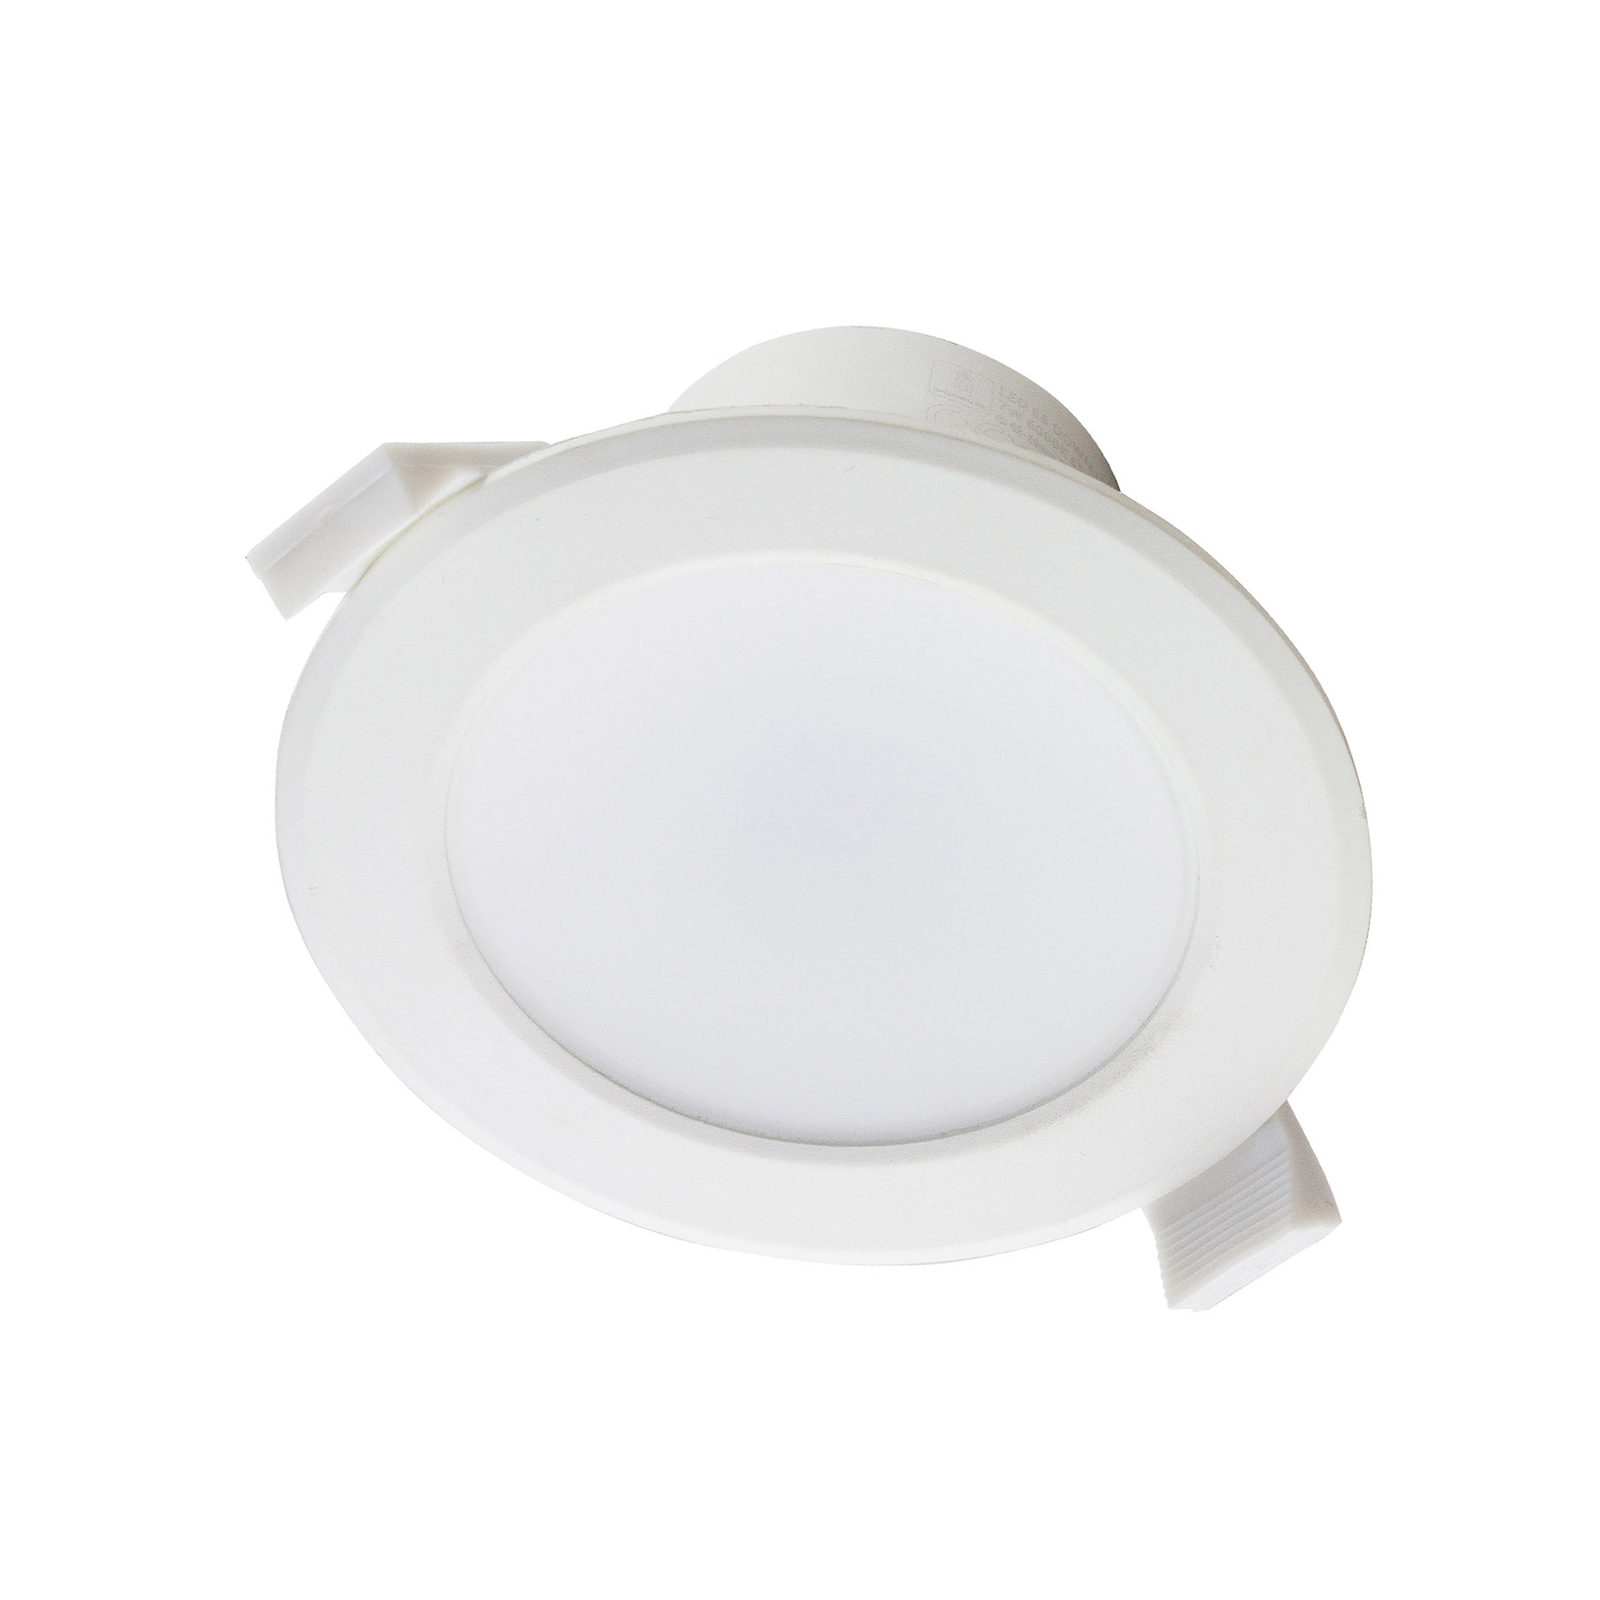 Prios LED recessed light Rida, 9.7cm 7W, set of 10, CCT, dimmable